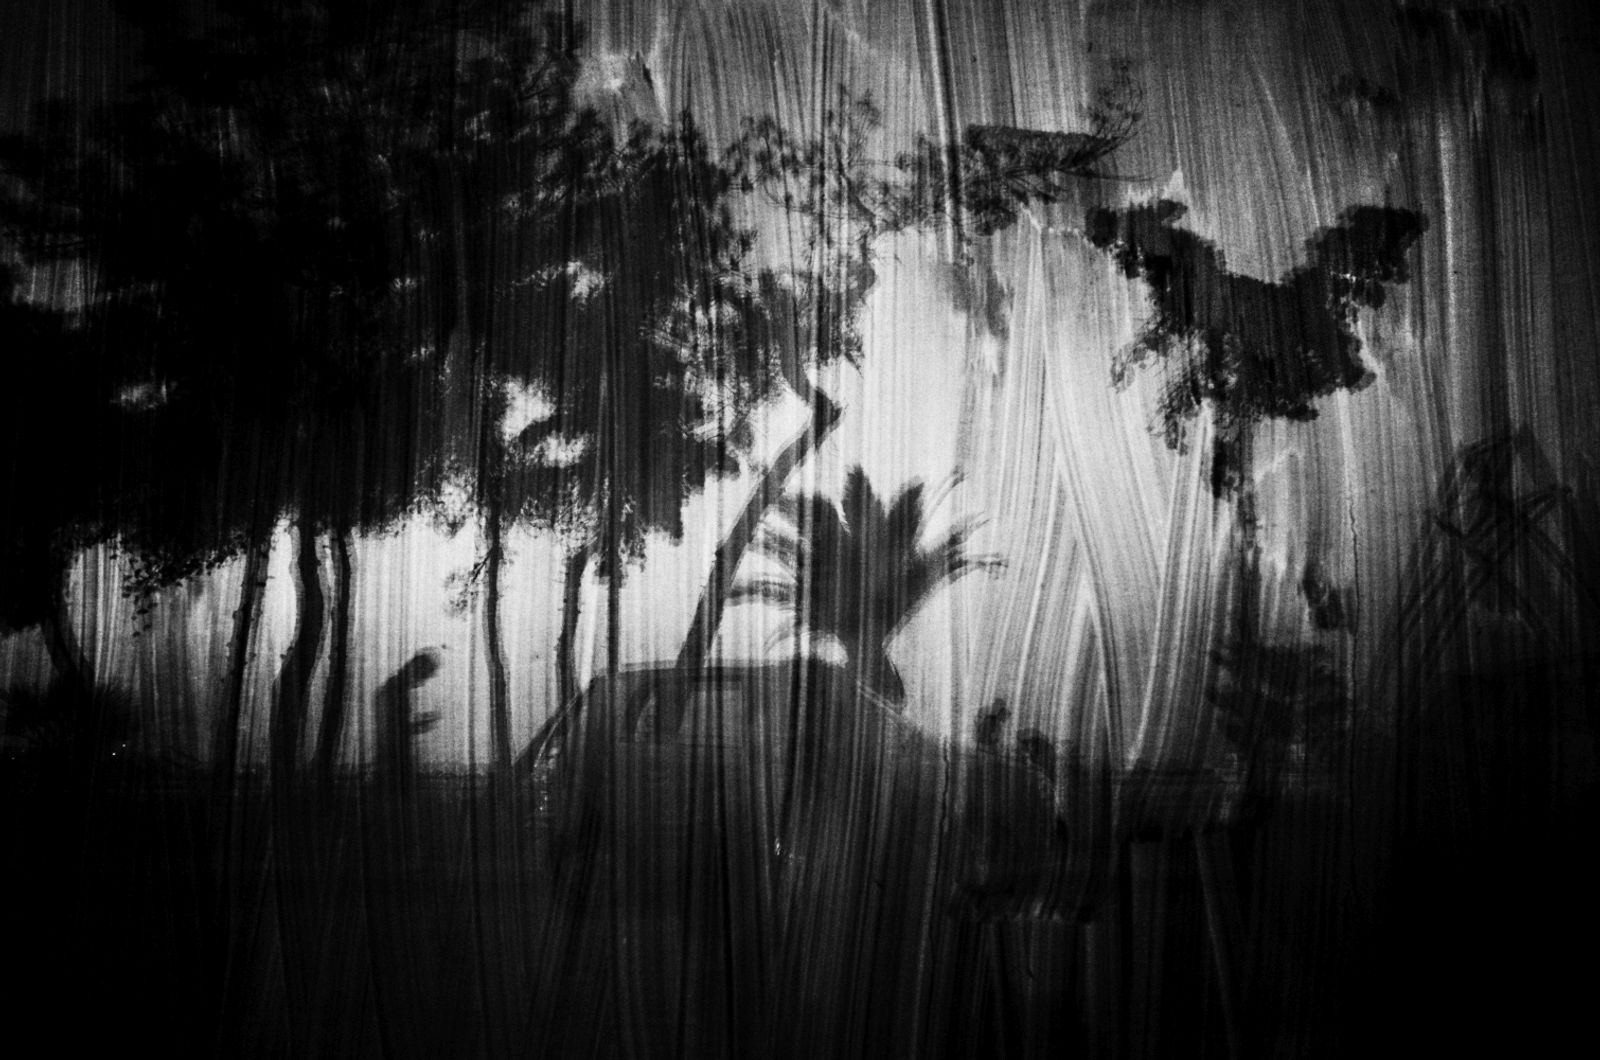 © Stavros Stamatiou - Image from the A raven's dream photography project